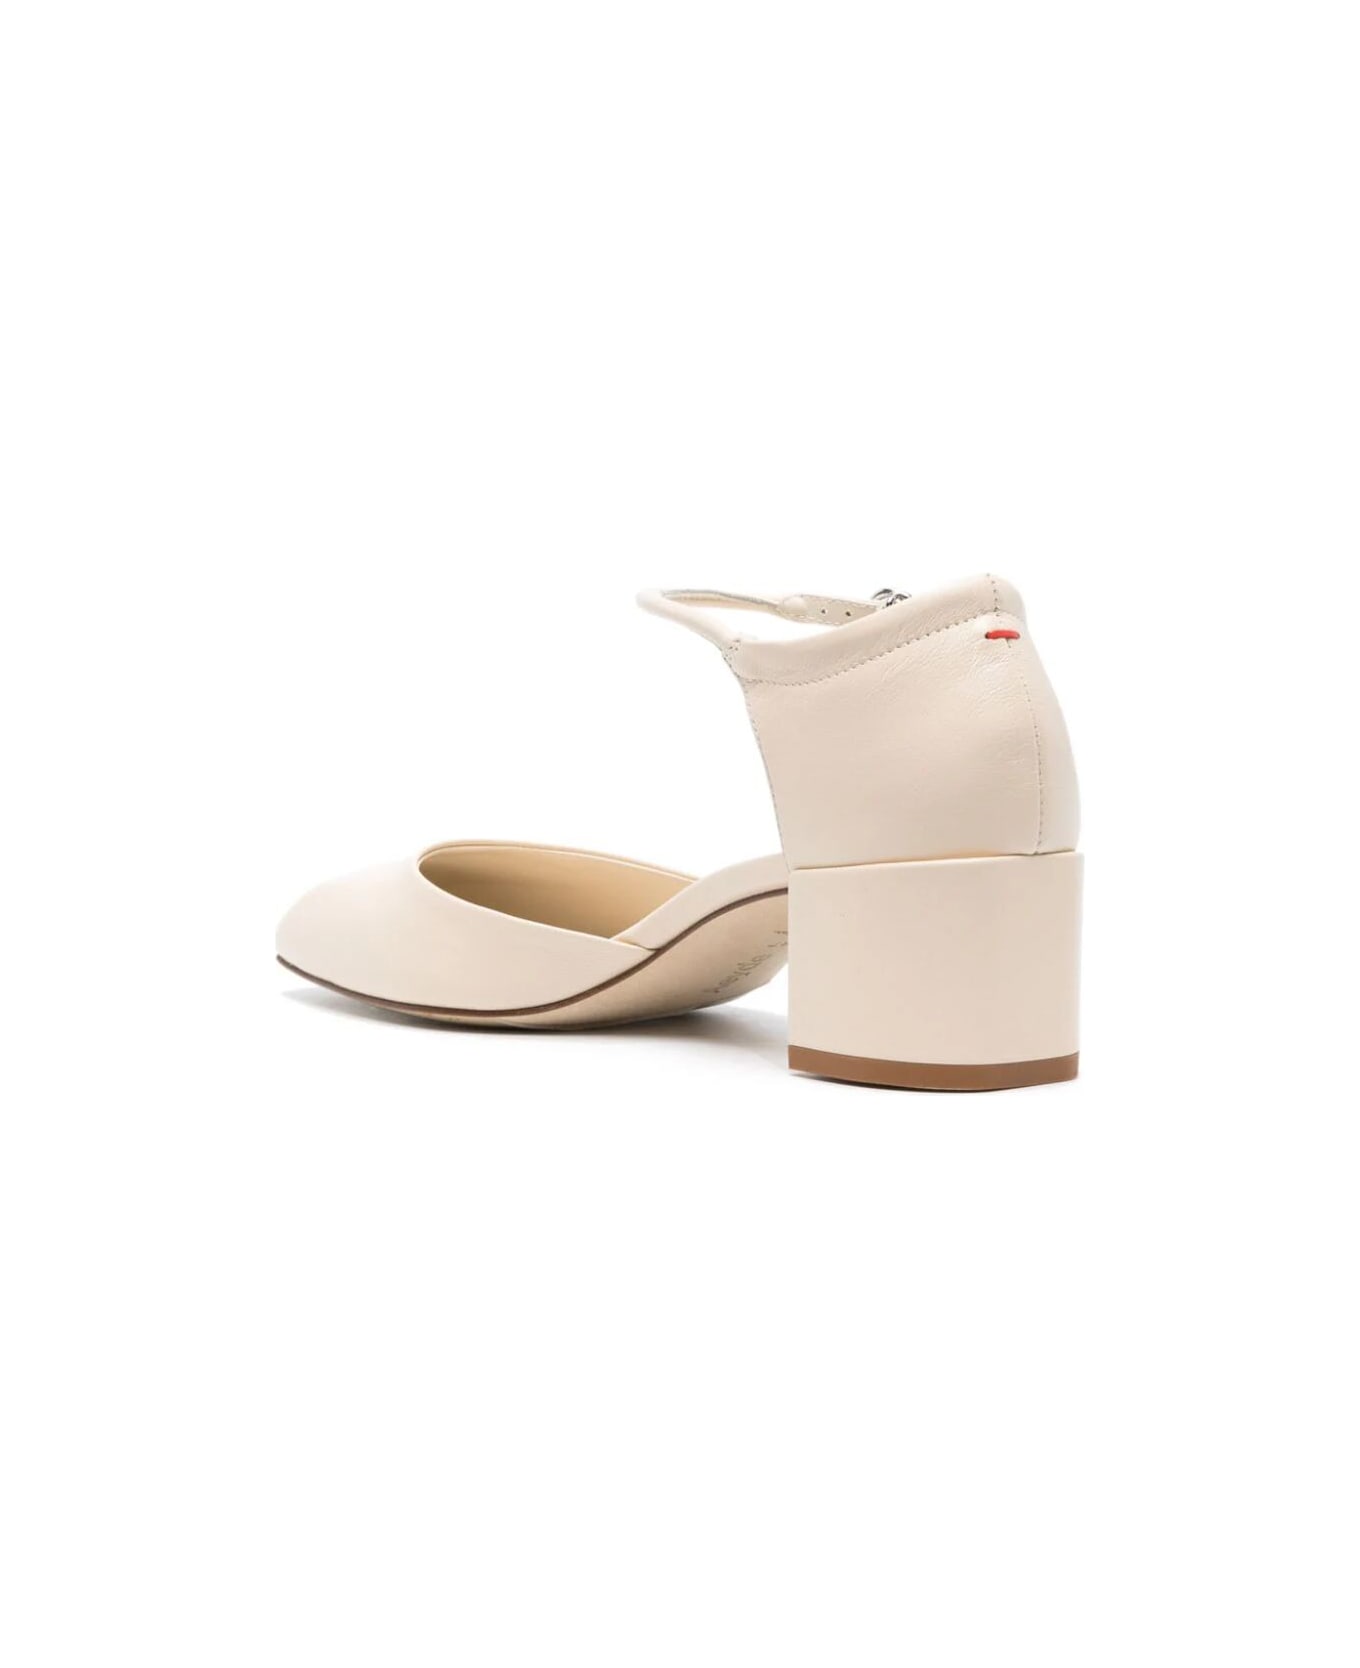 aeyde Magda Nappa Leather Creamy Shoes - Creamy ハイヒール